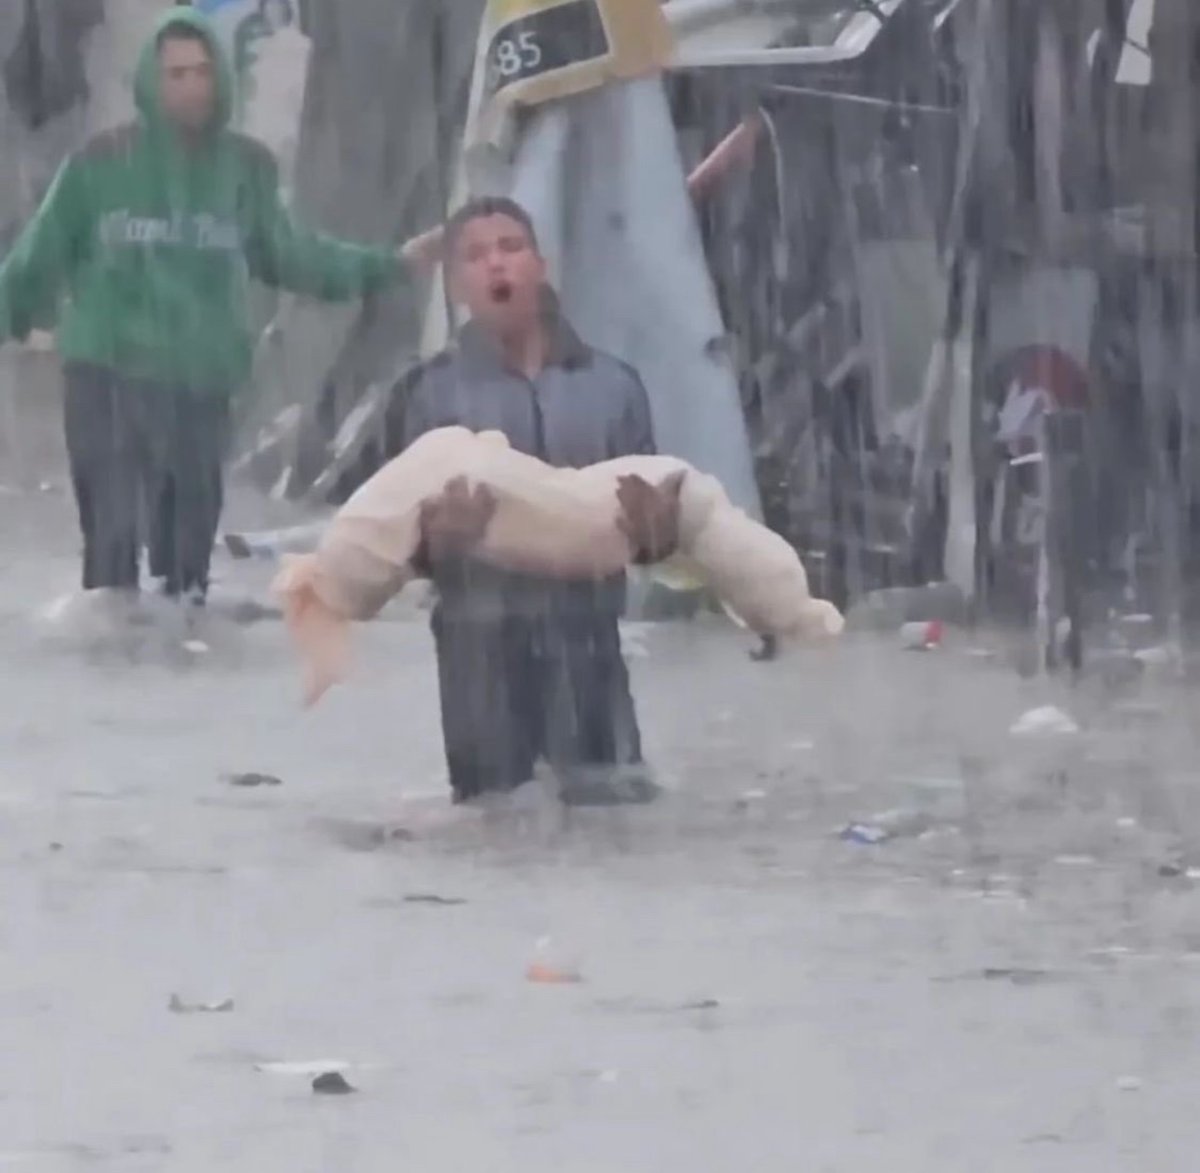 THE WORLD WATCHED THIS PALESTINIAN BOY CARRYING THE CORPSE OF A CHILD IN THE RAIN This did not impact the World.